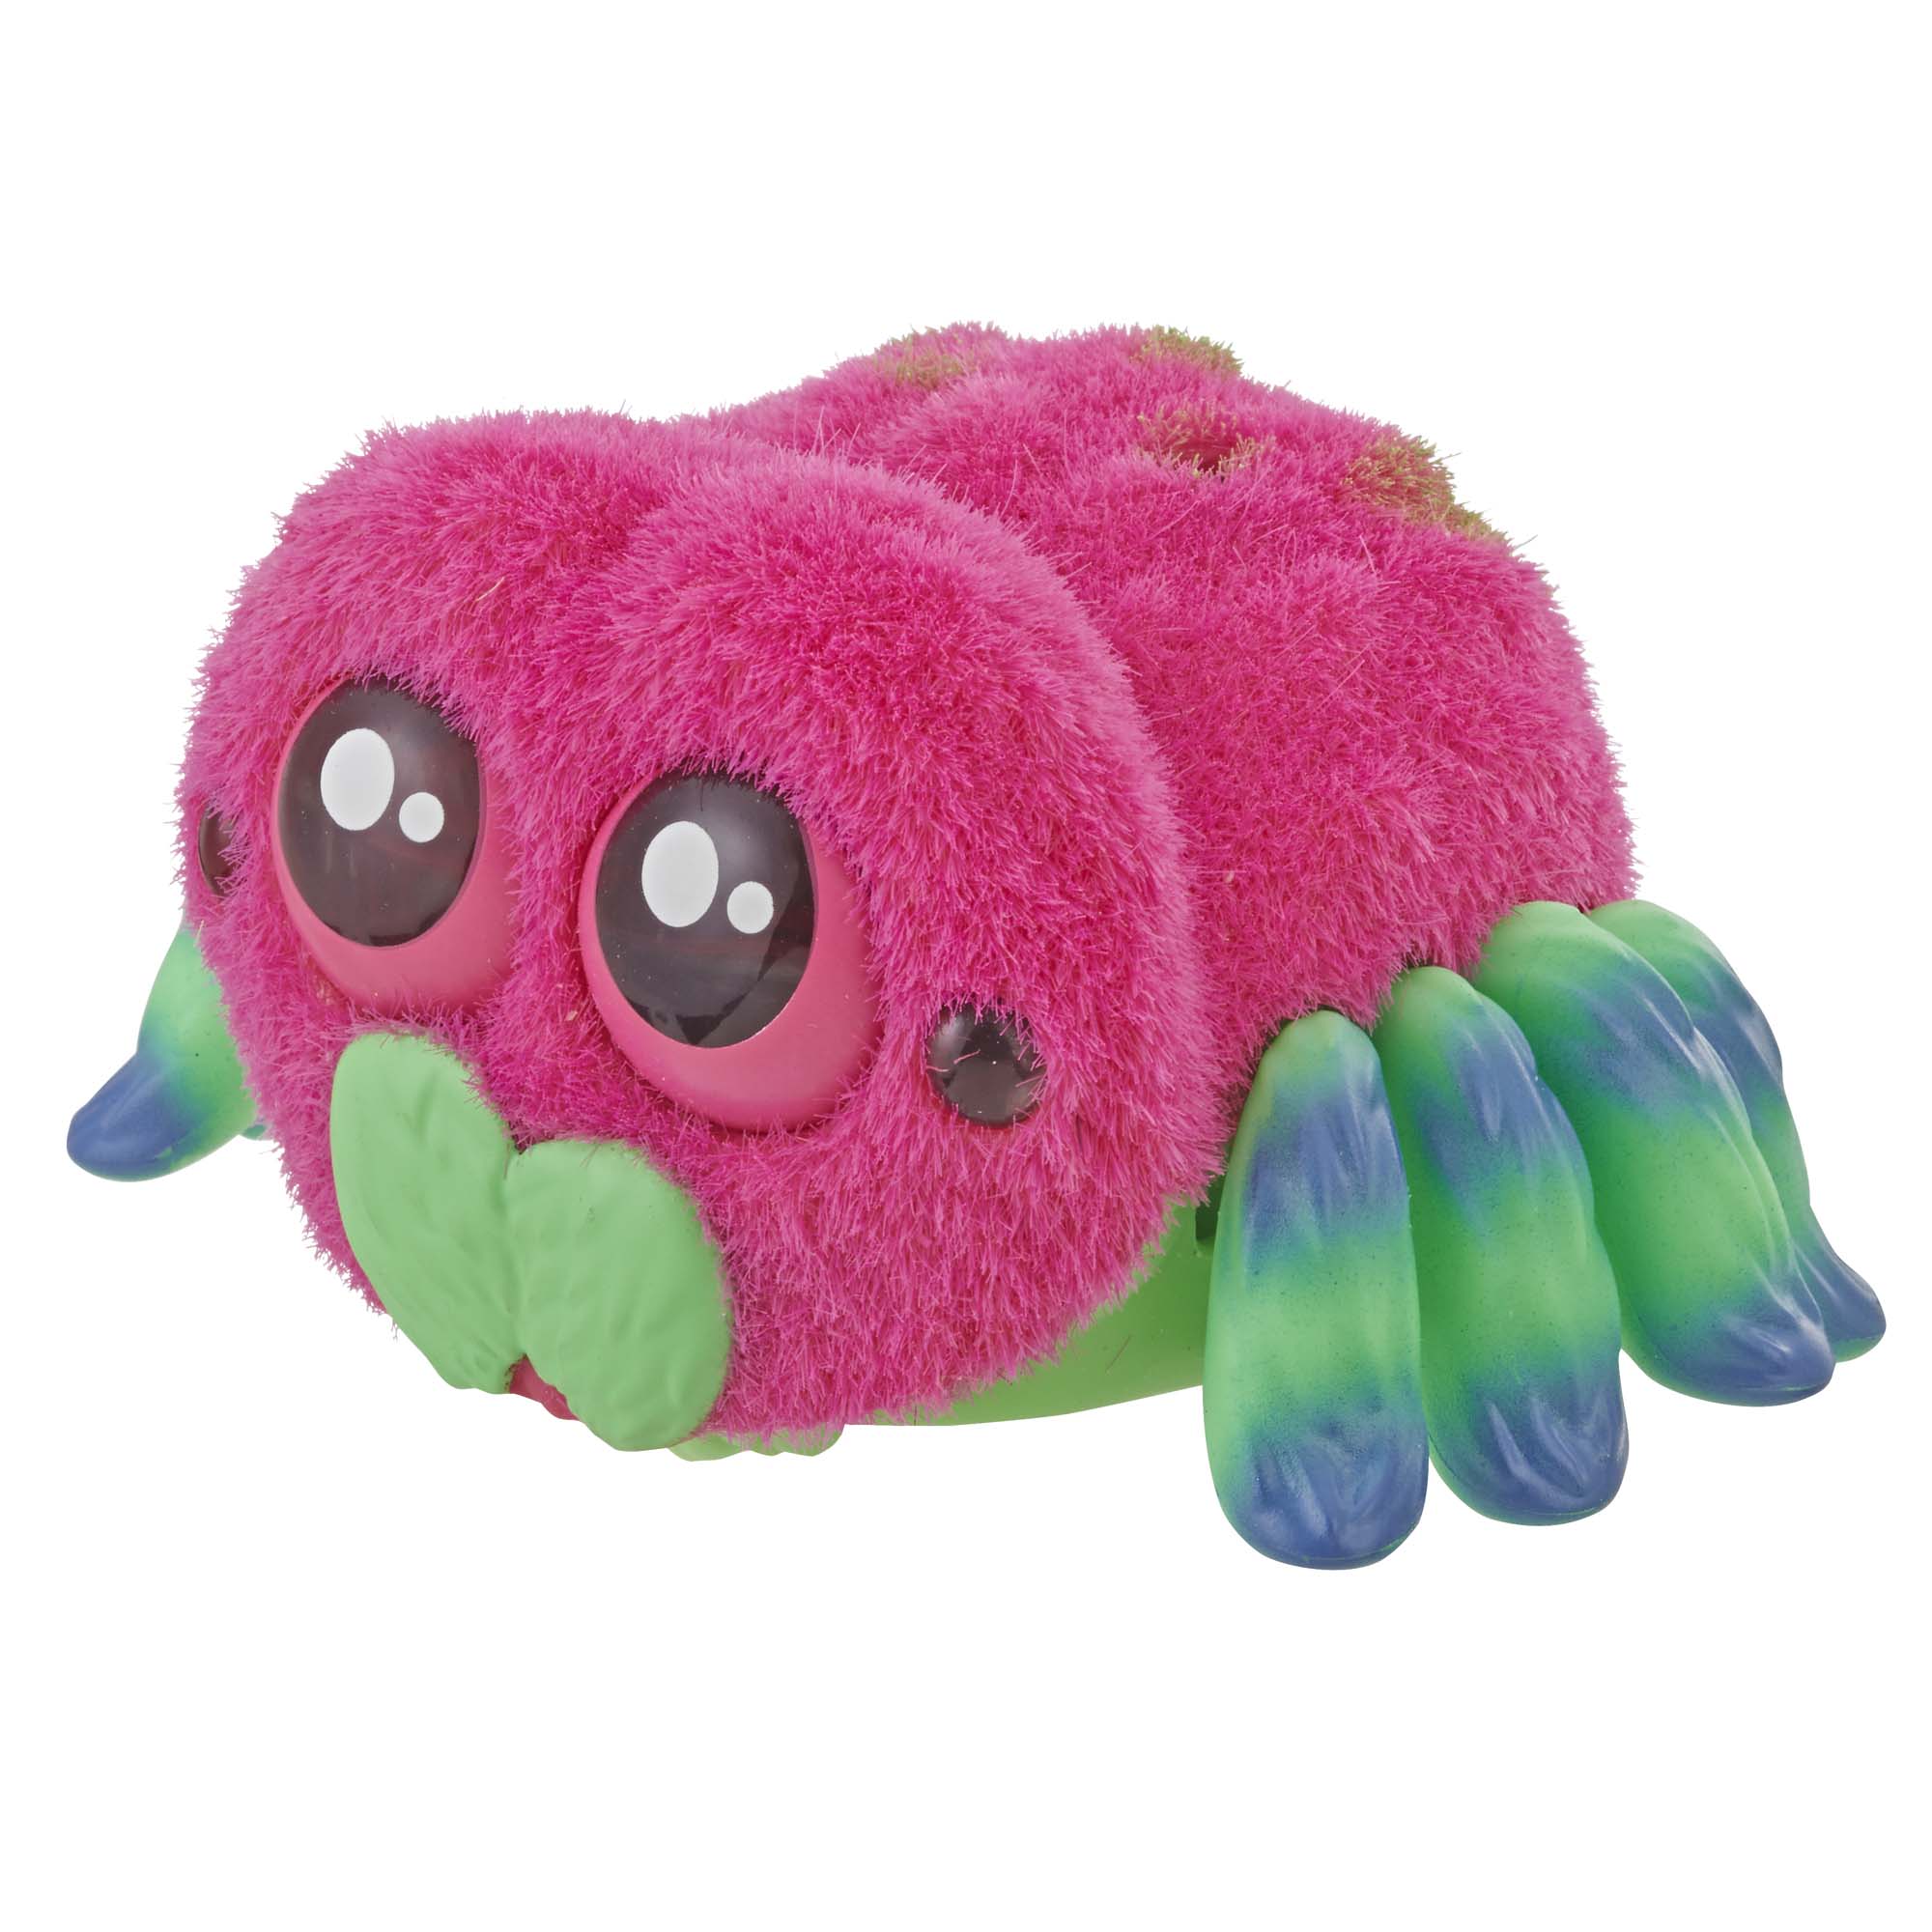 Yellies! Sammie; Voice-Activated Spider Pet; Ages 5 and up - image 1 of 2